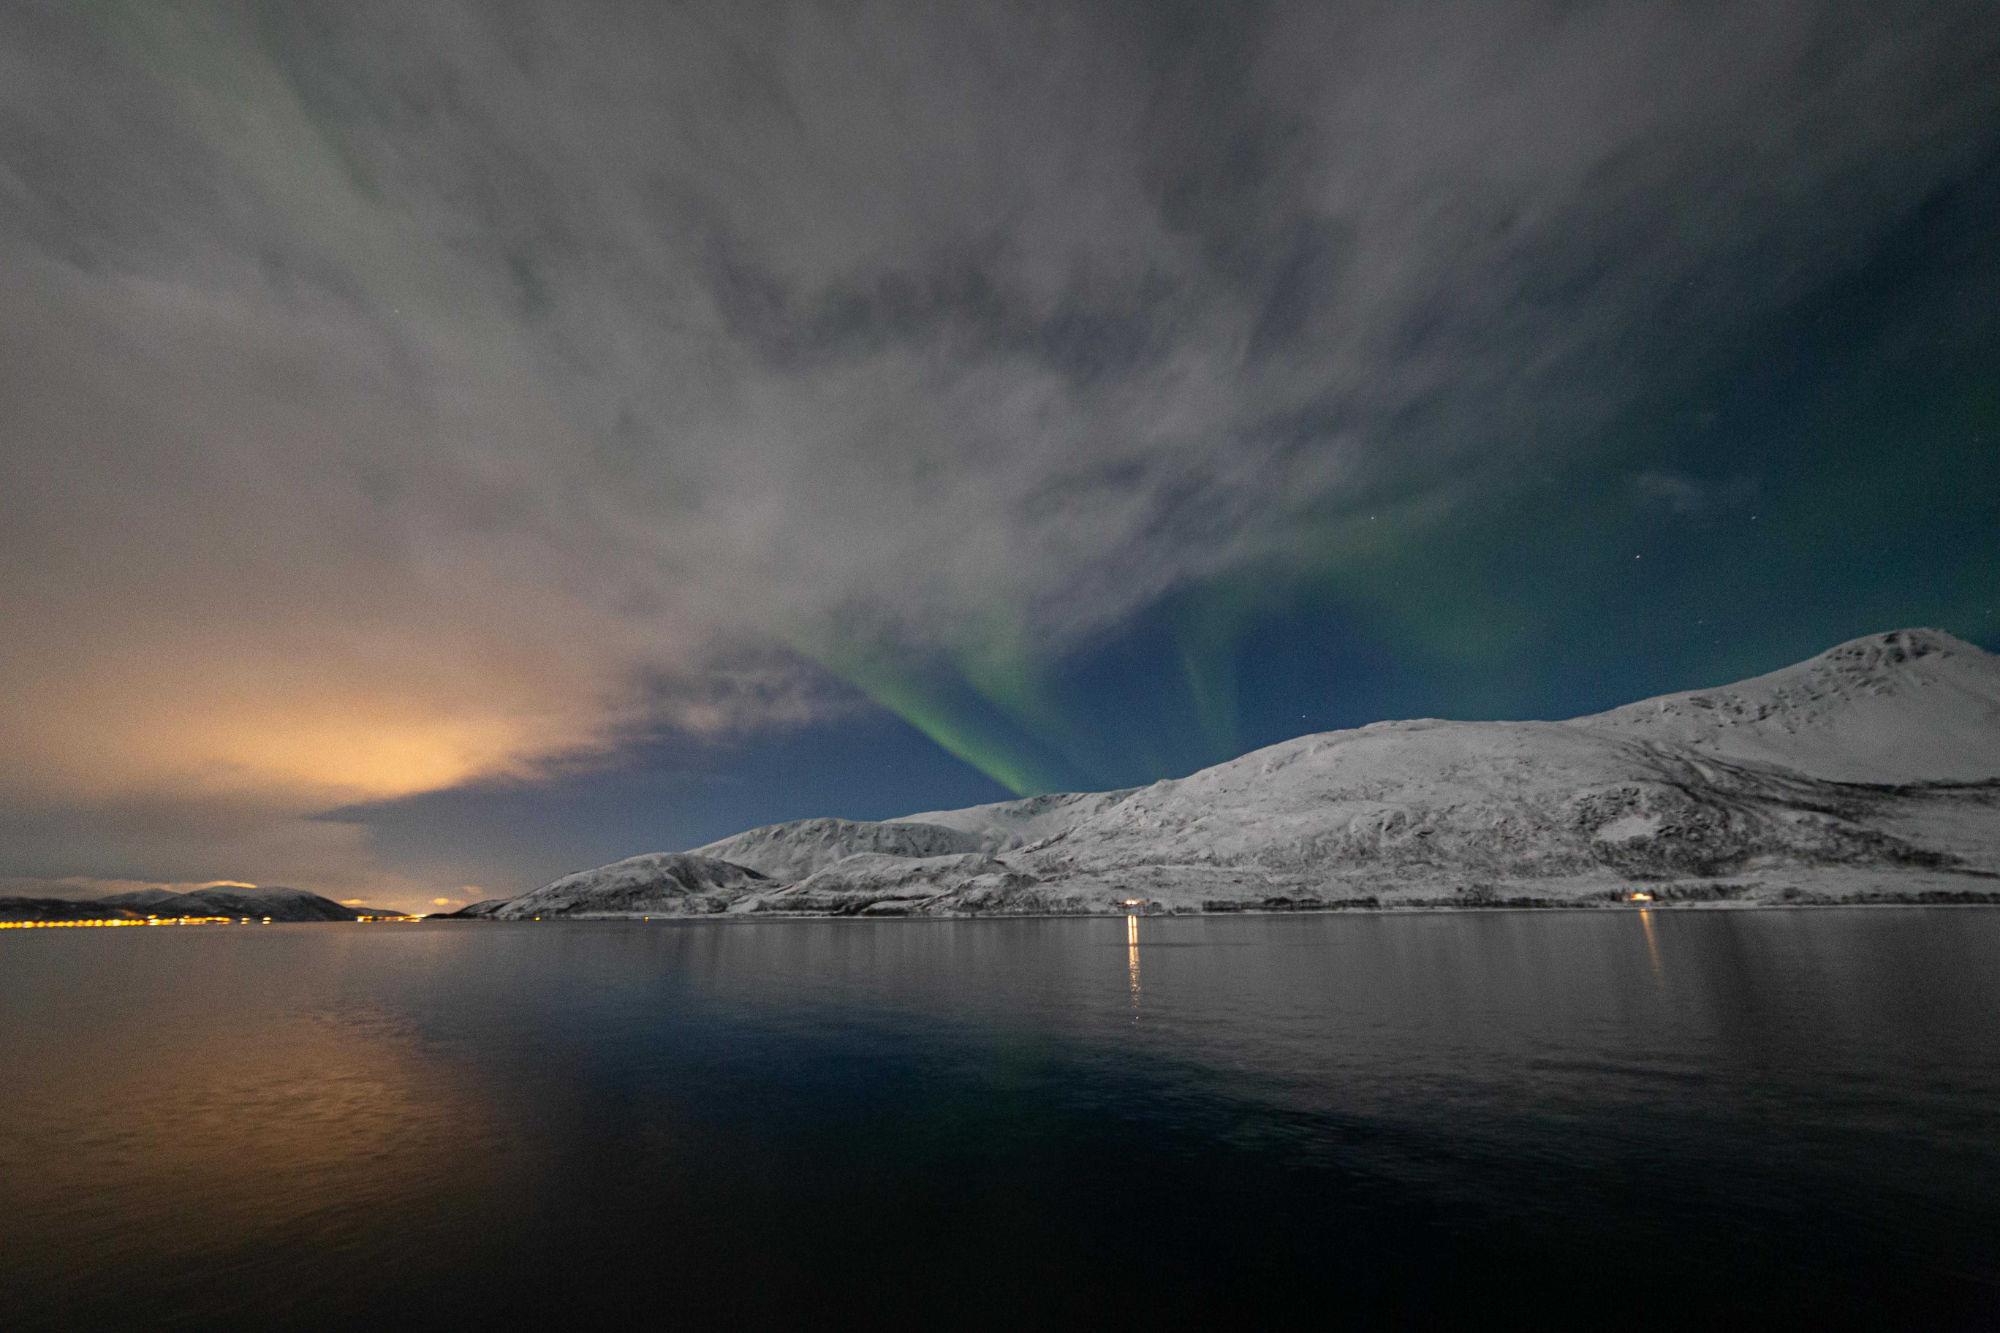 View from a northern lights cruise in tromsø norway